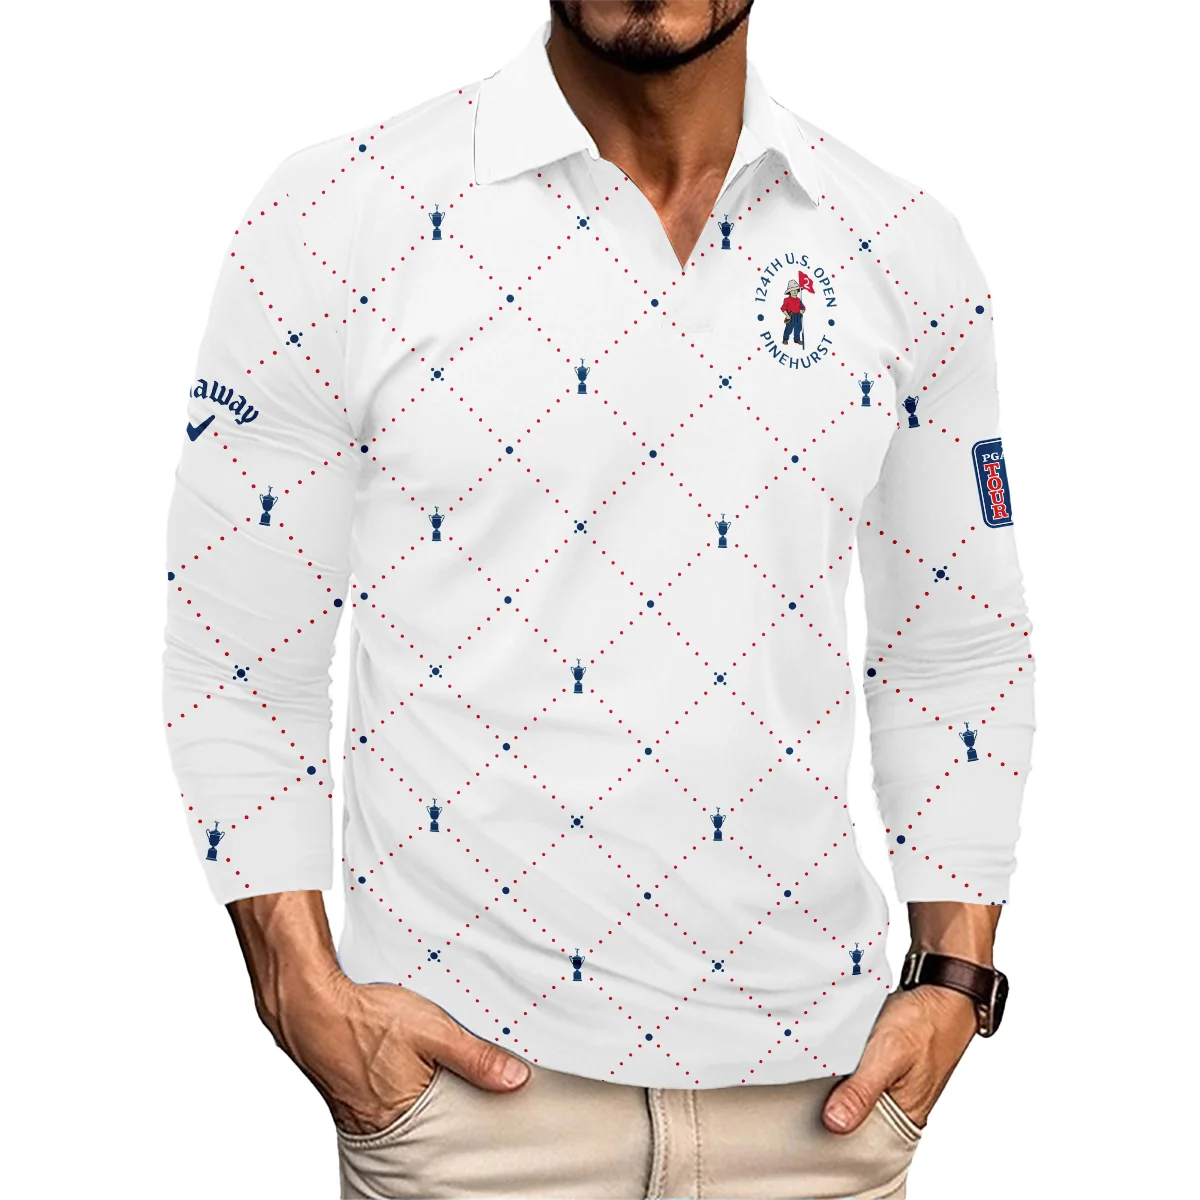 Argyle Pattern With Cup 124th U.S. Open Pinehurst Callaway Vneck Polo Shirt Style Classic Polo Shirt For Men